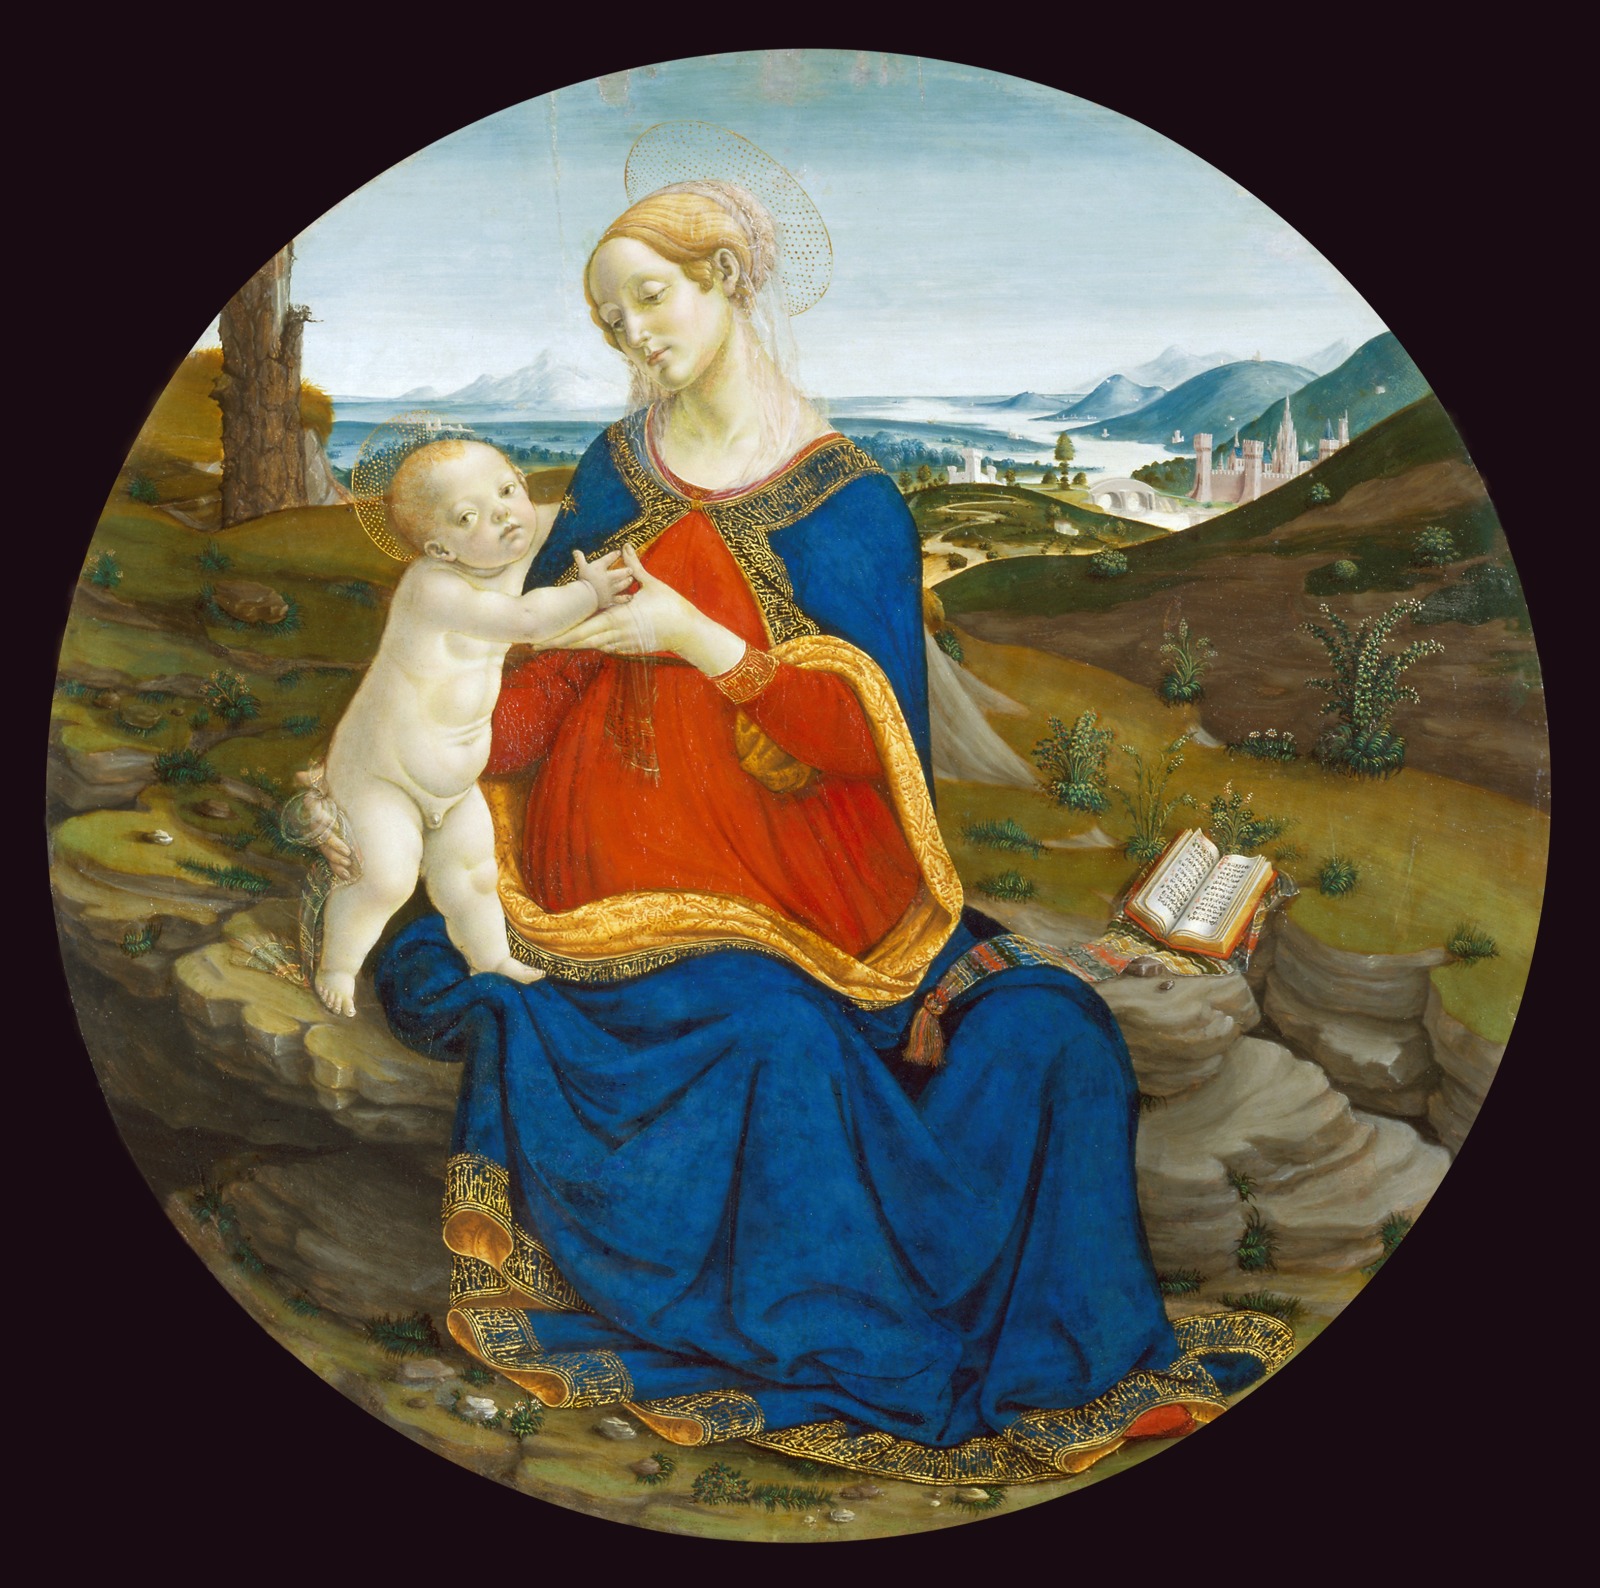 Madonna and Child with a Breviary